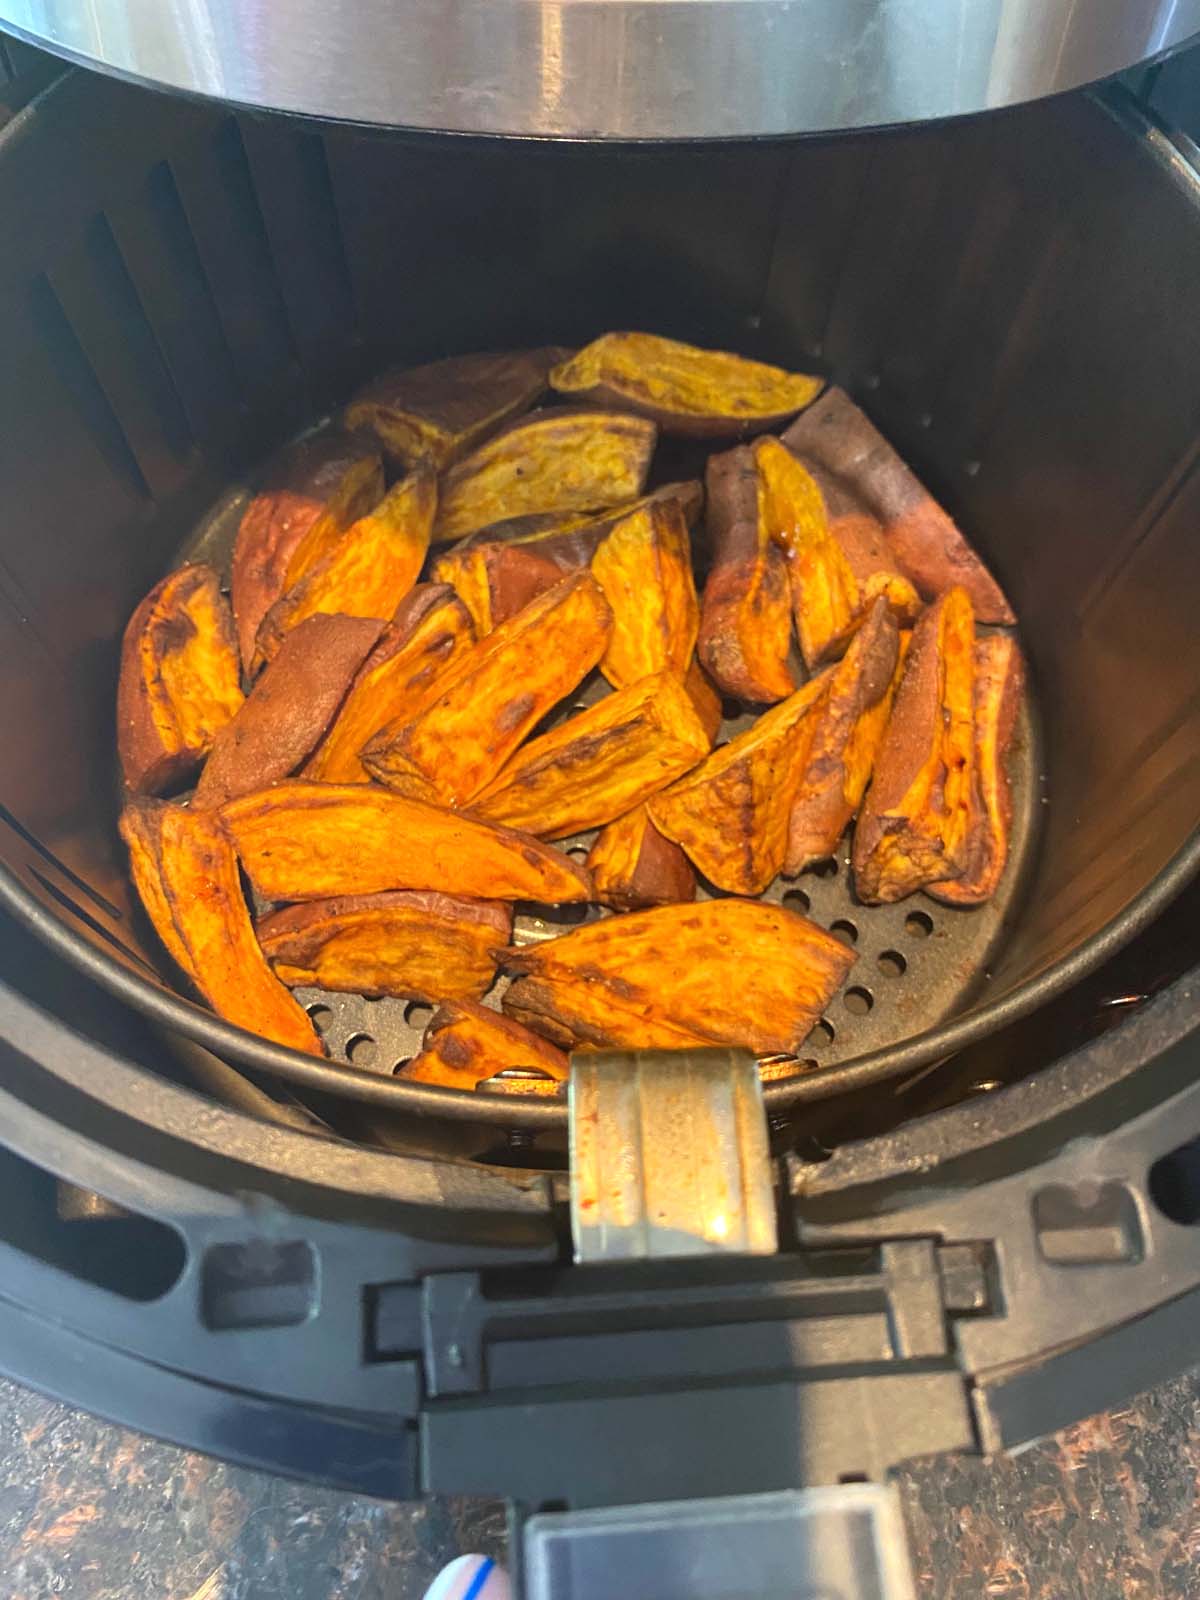 Cooked sweet potato wedges in an air fryer.